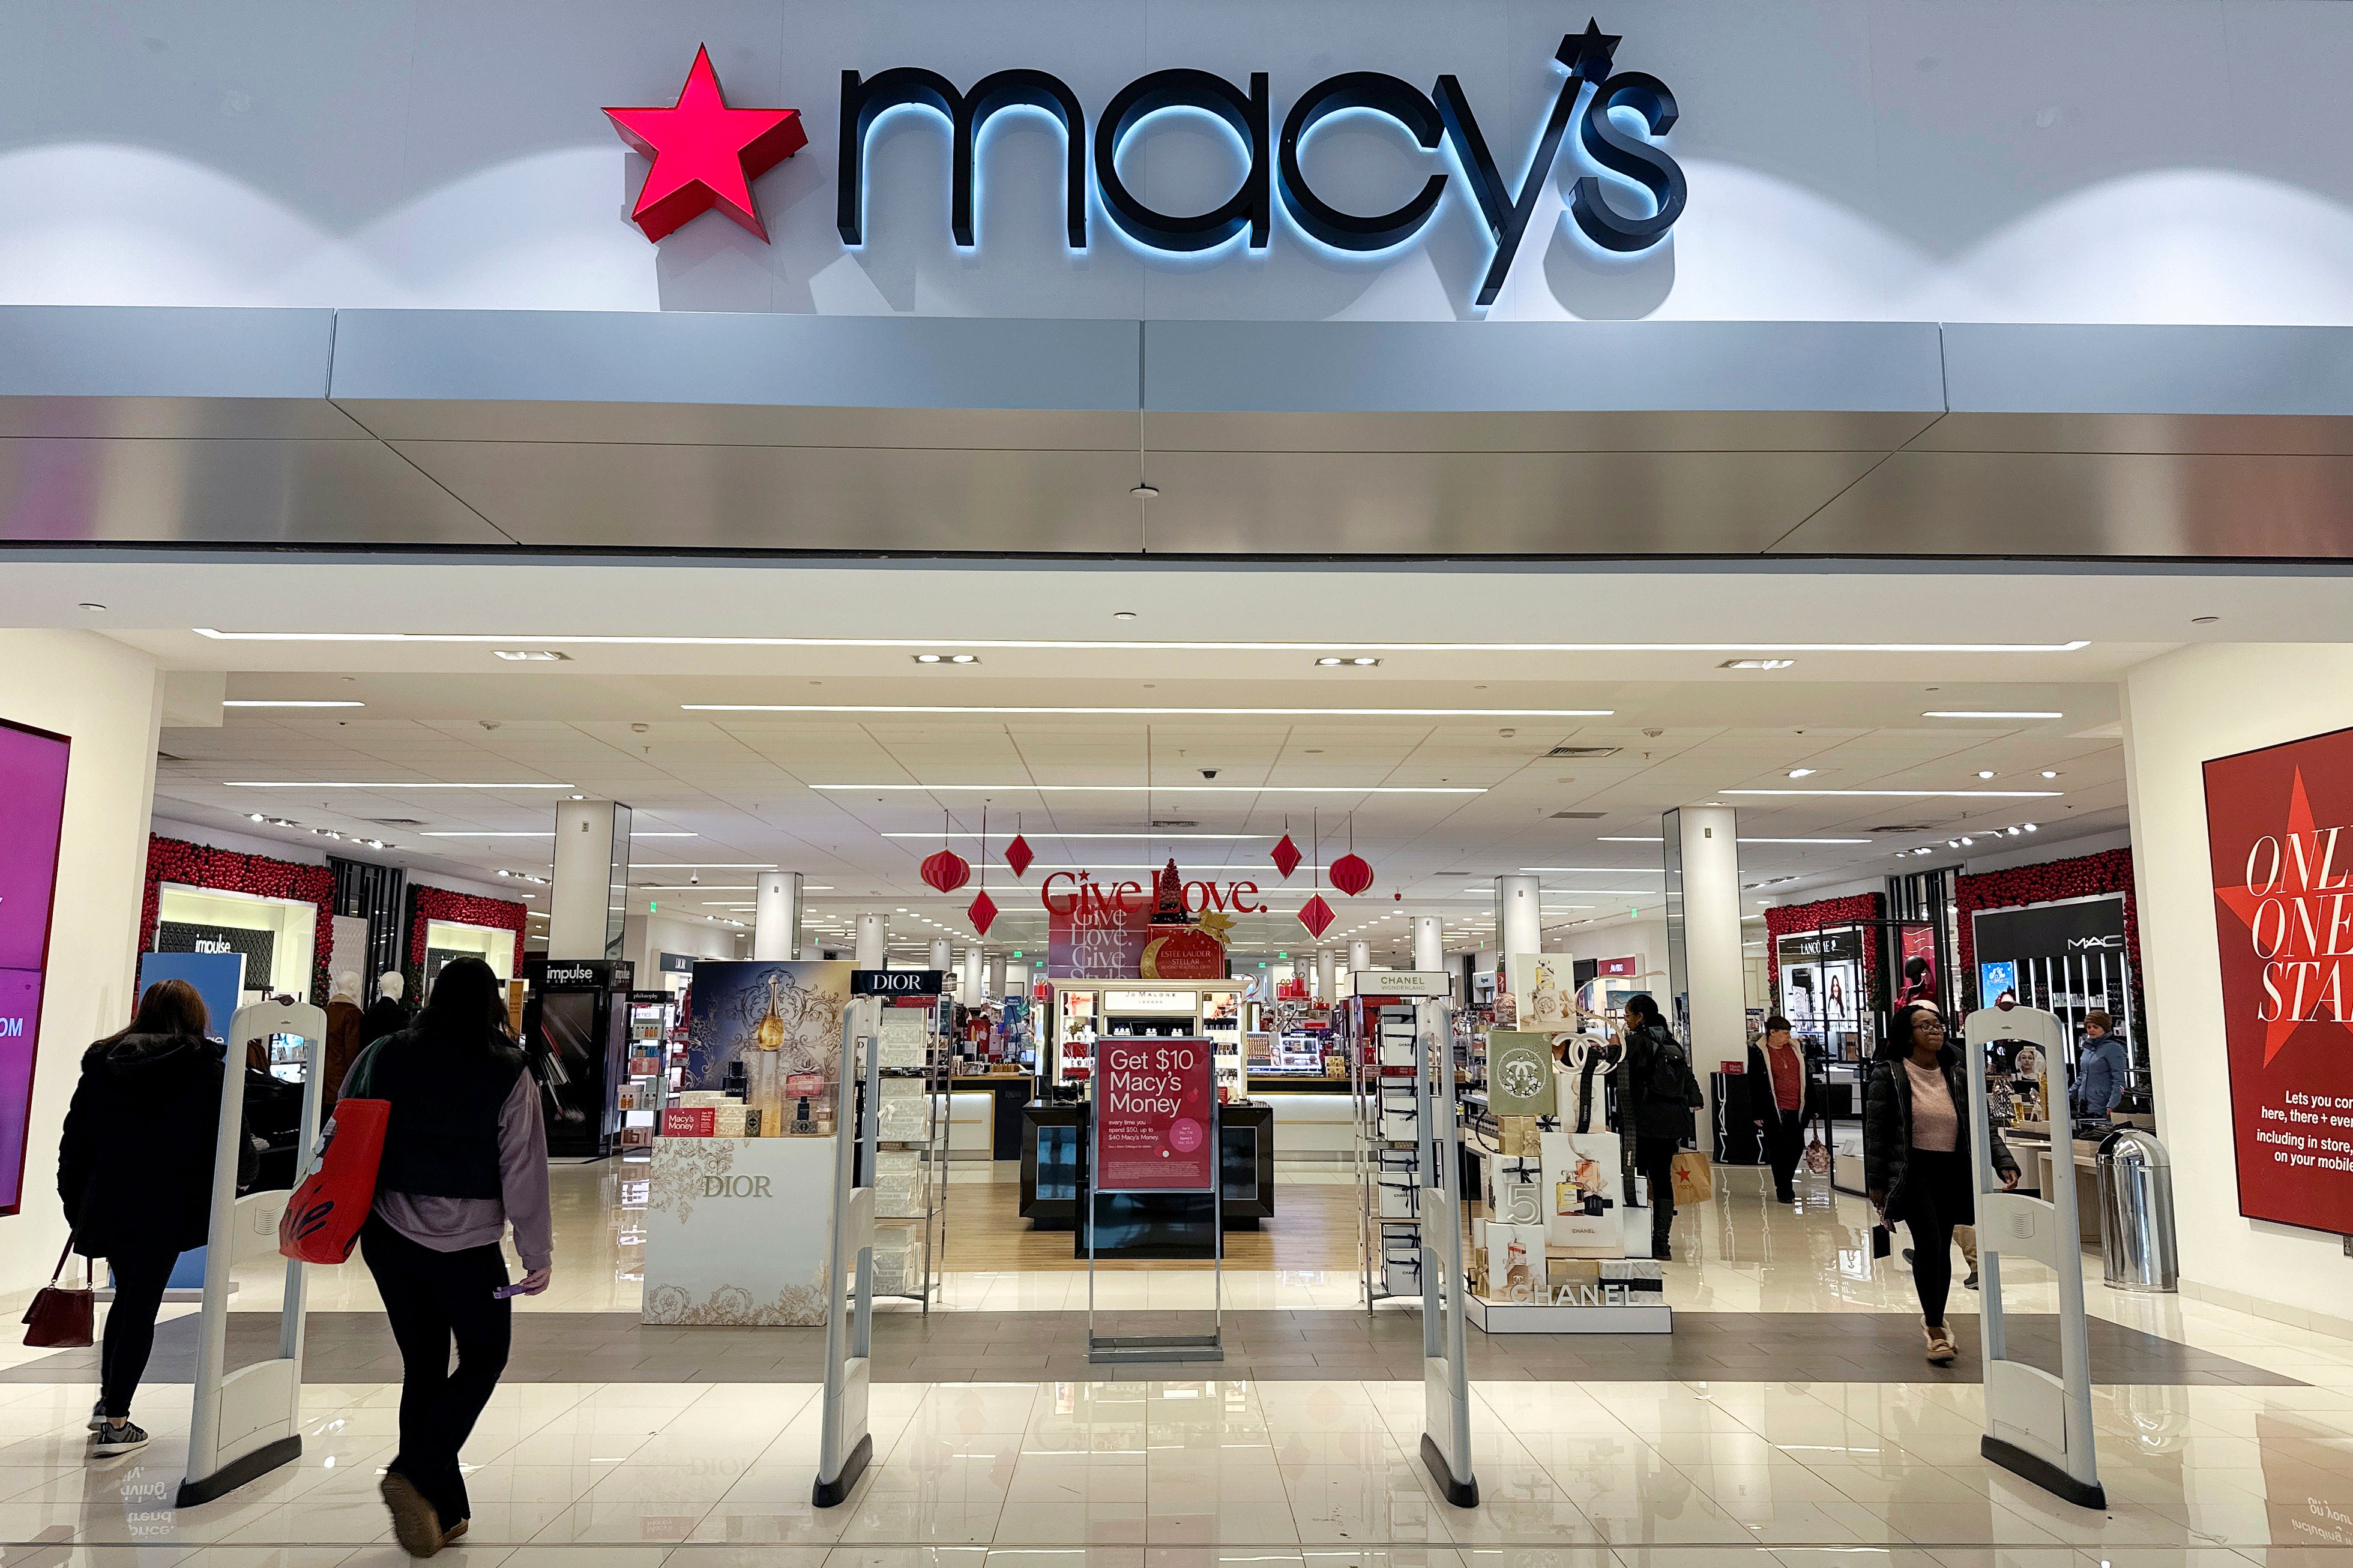 Macy’s announced plans to close more than 100 stores